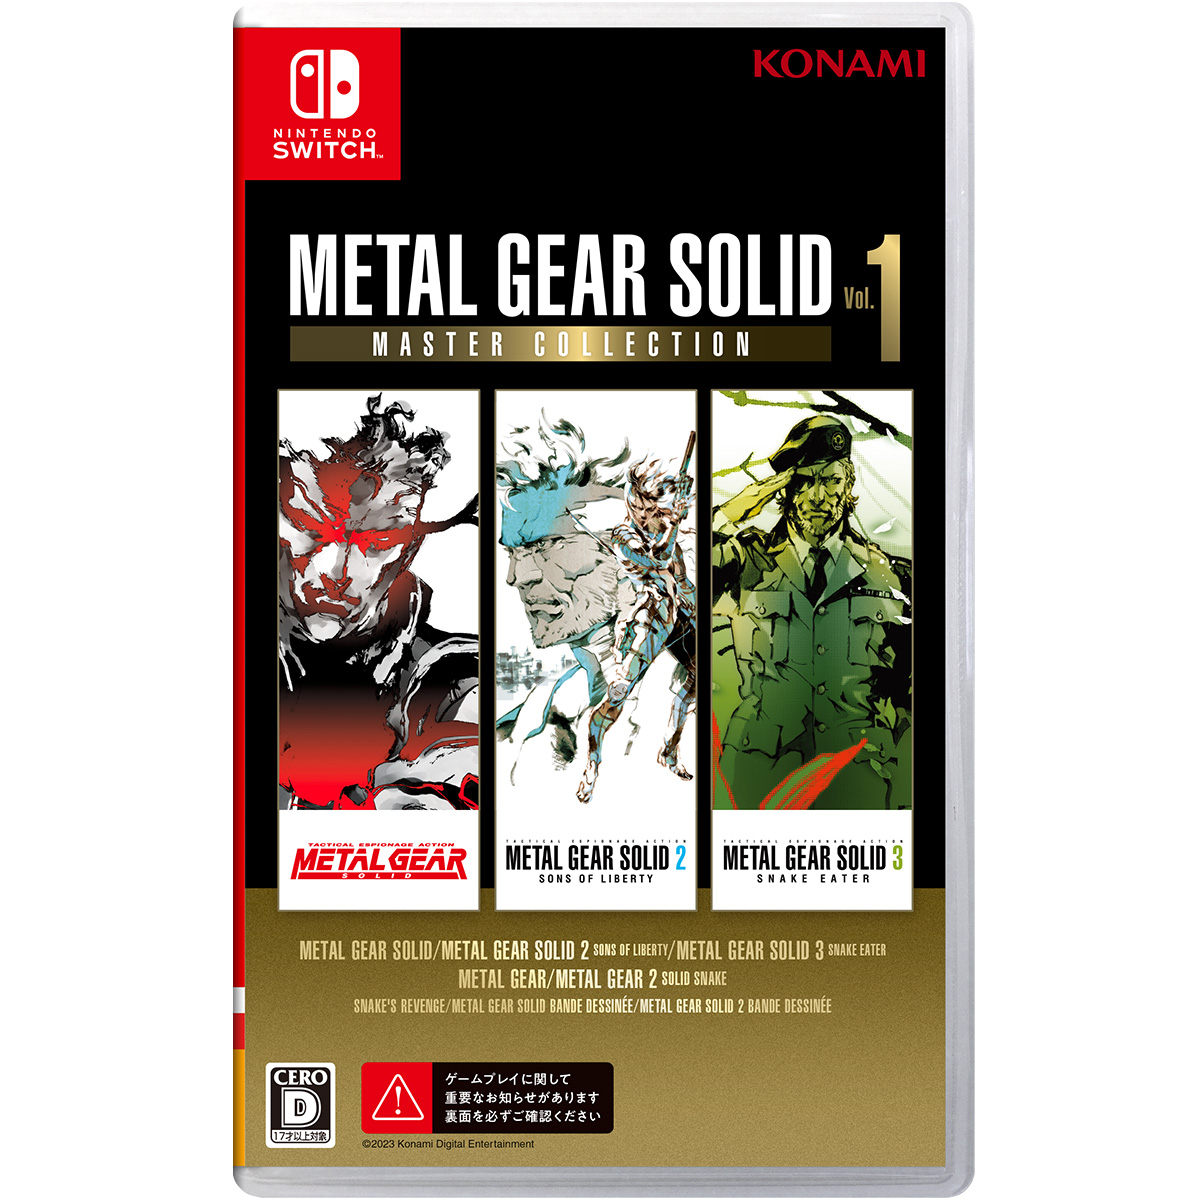 ［Switch］［宅配便］METAL GEAR SOLID: MASTER COLLECTION Vol.1　メタルギアソリッド